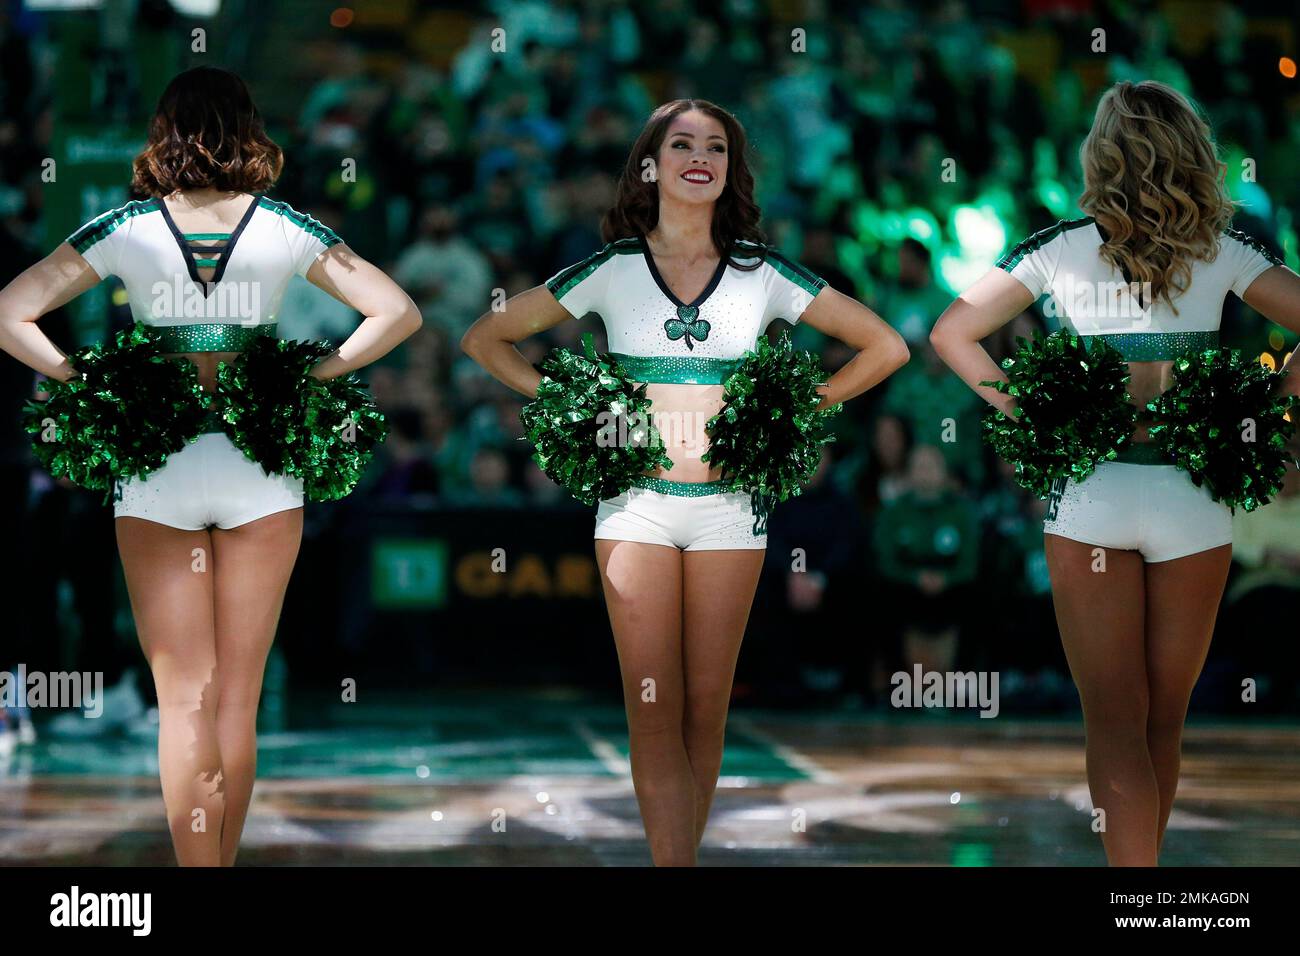 The Boston Celtics dancers perform before a game against the New